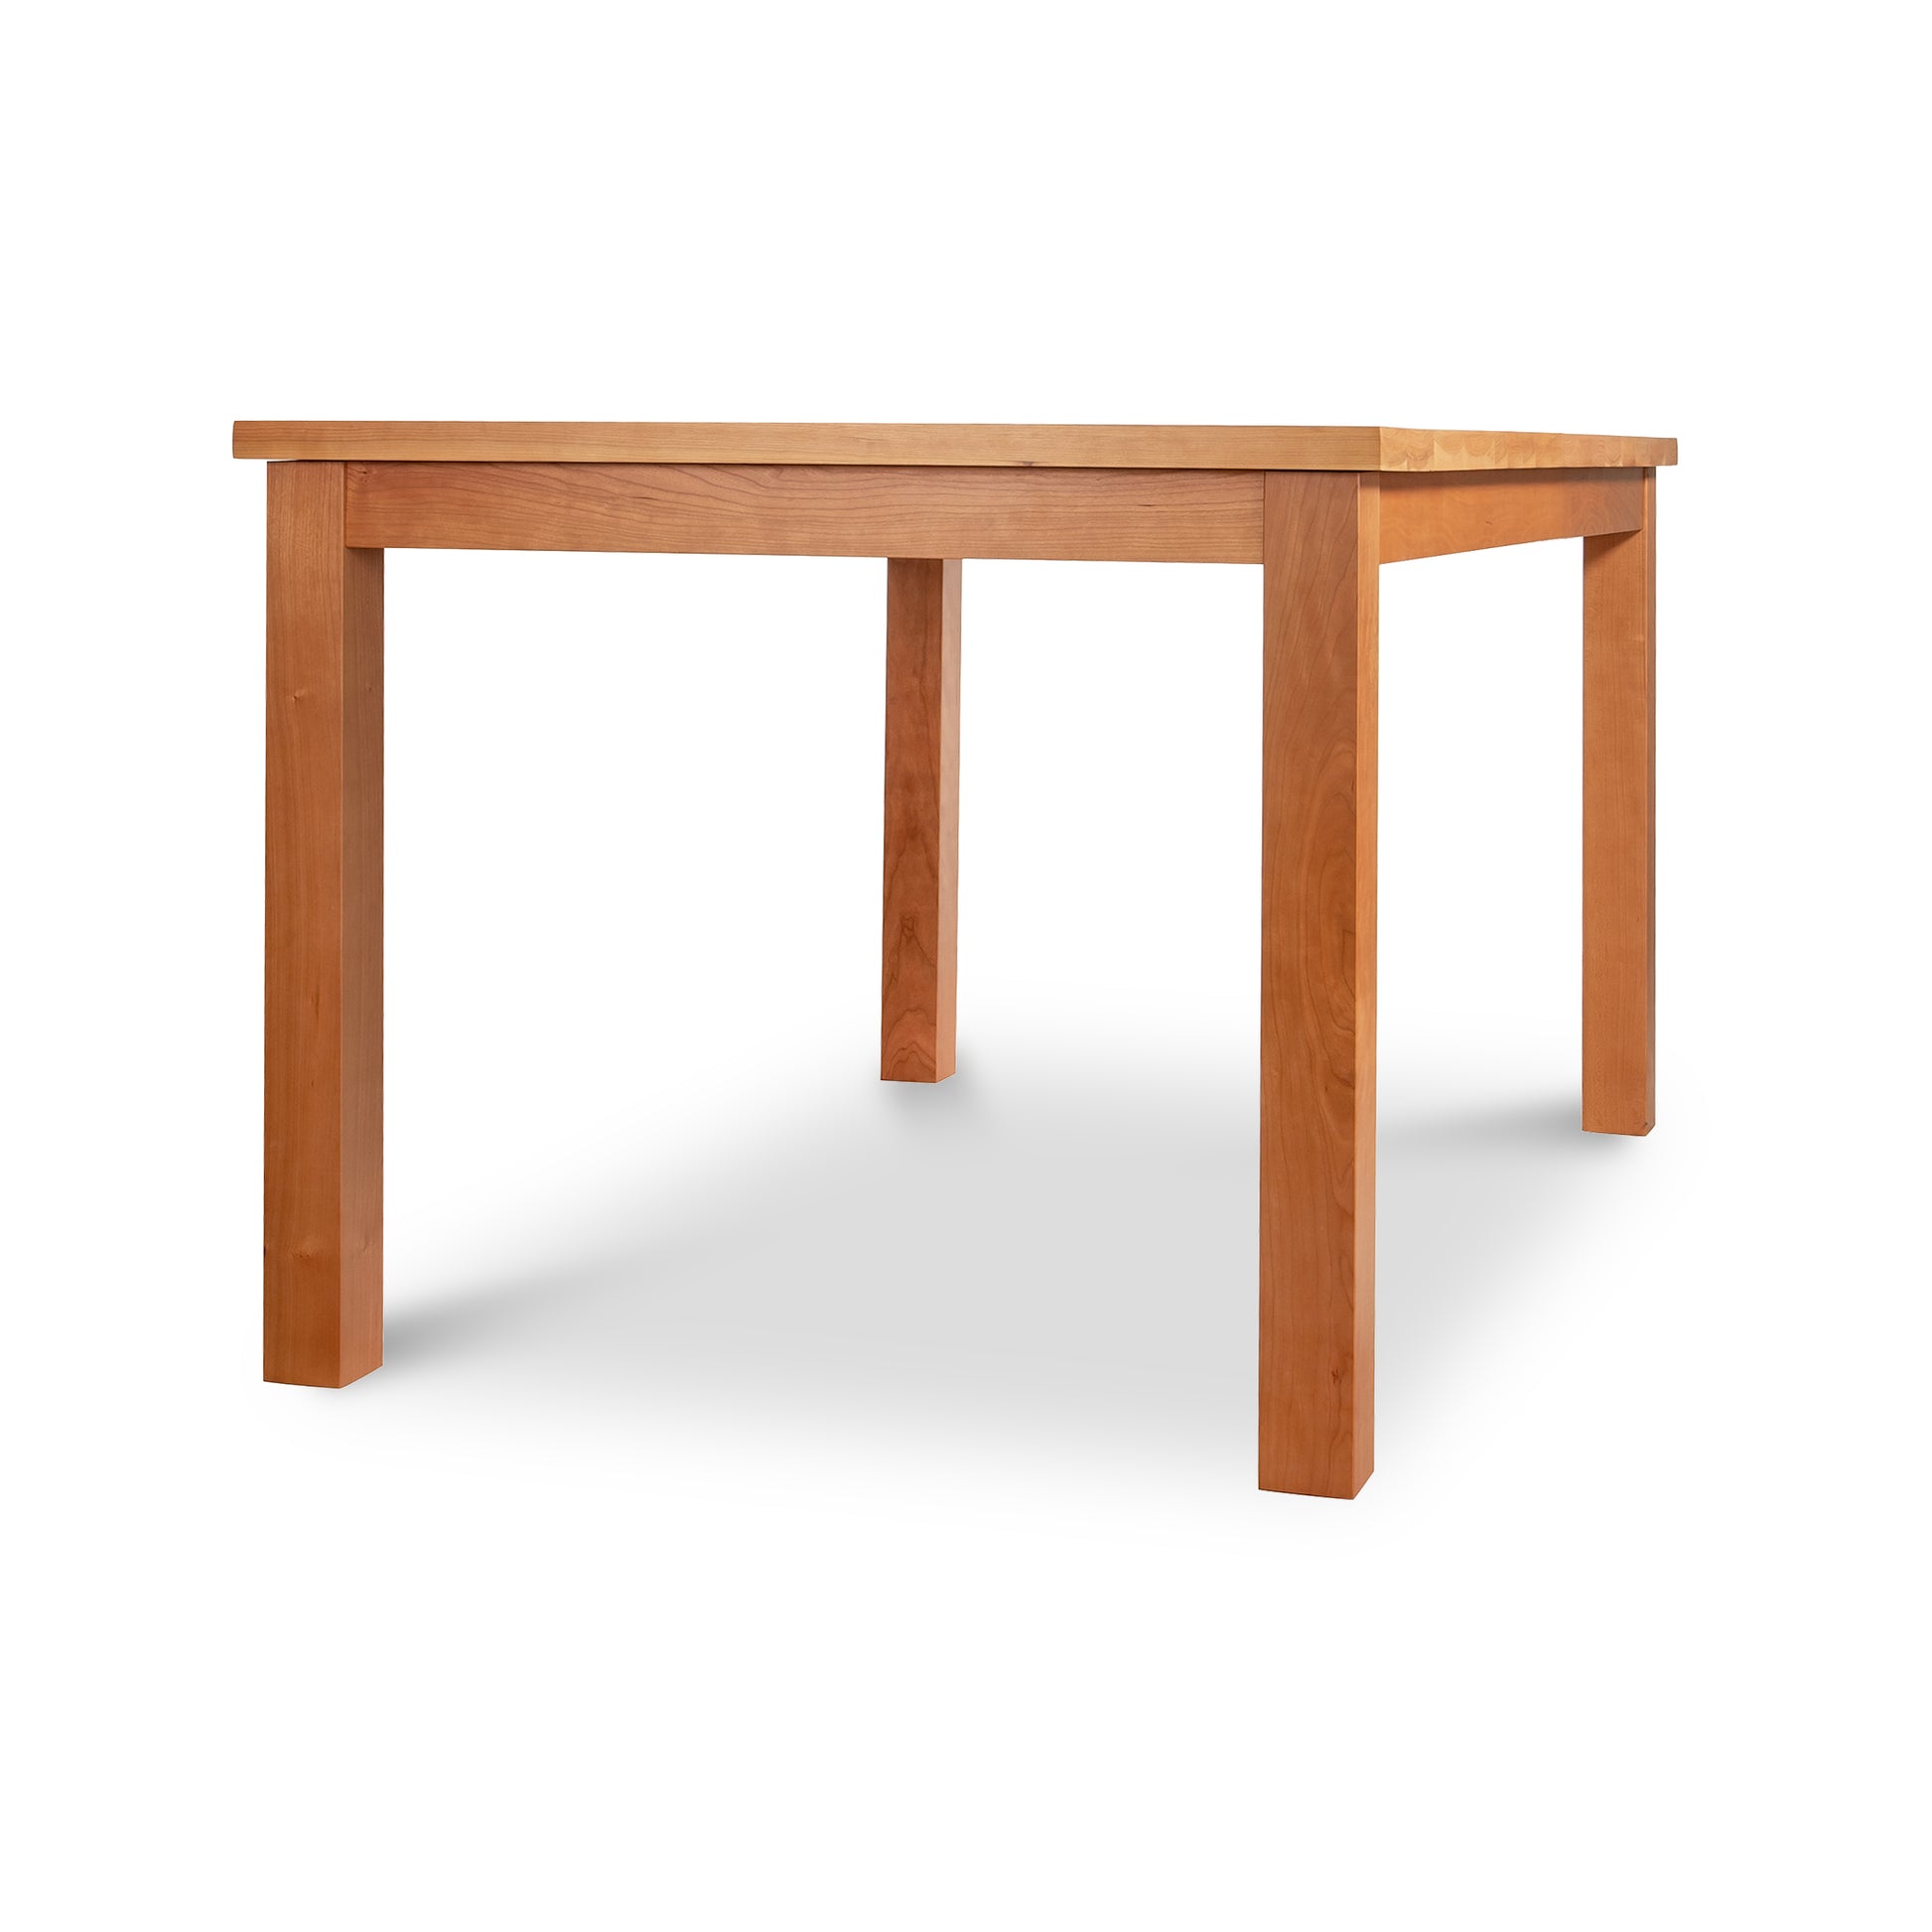 An eco-friendly Modern Mission Parsons Solid Top Table by Lyndon Furniture on a white background made from sustainable harvested woods.